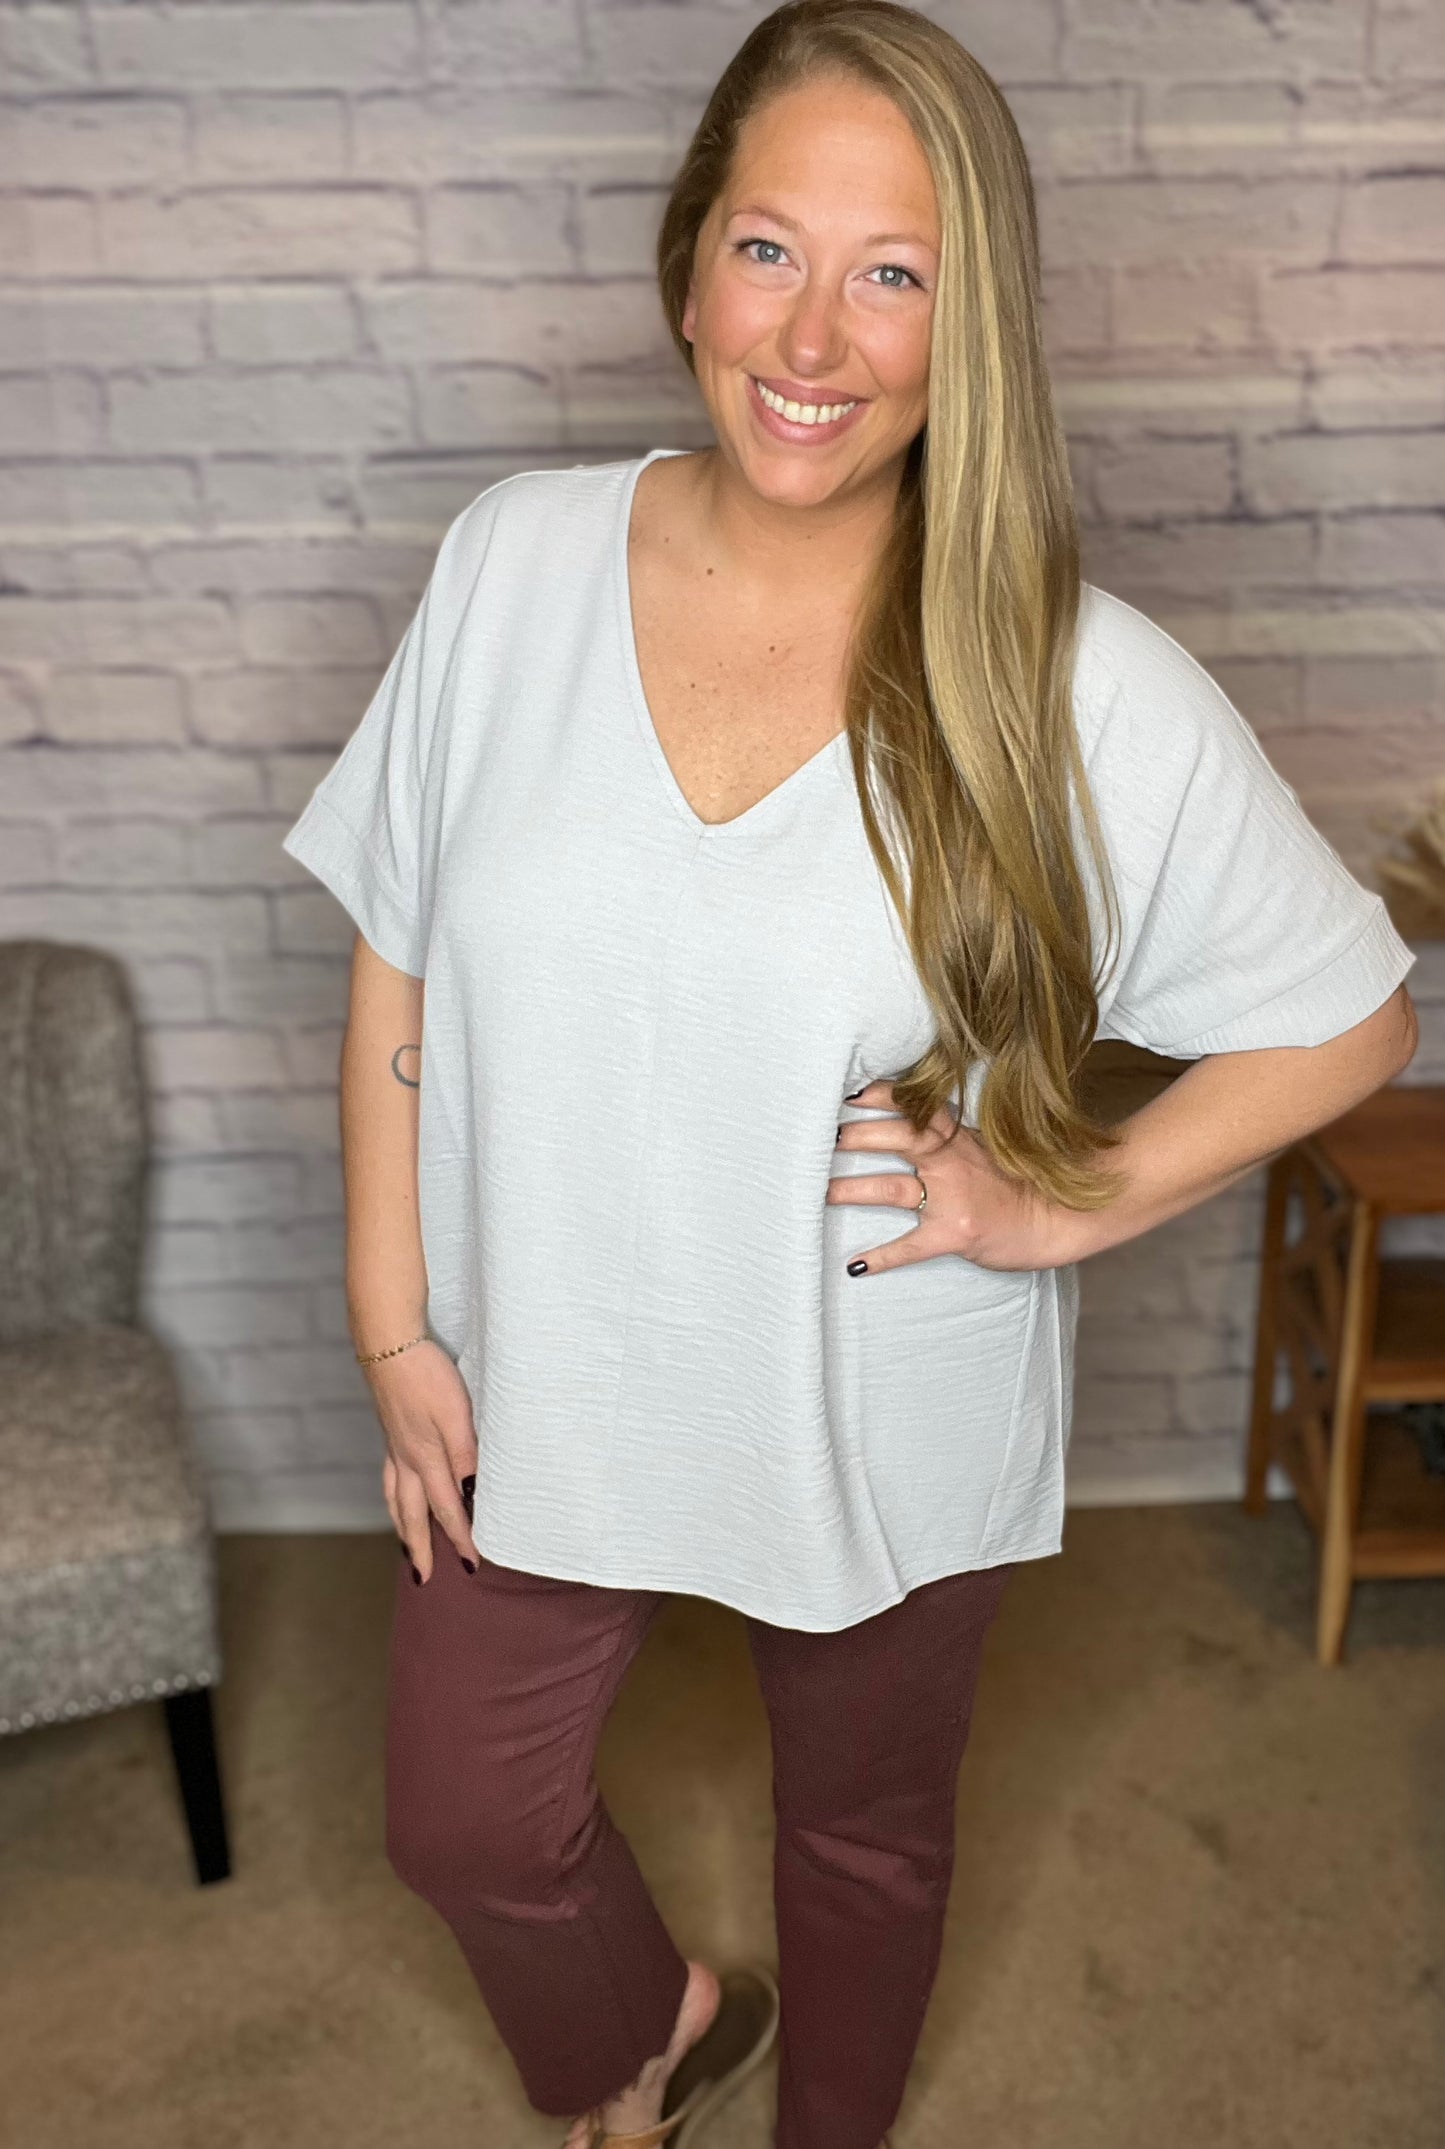 Woven Airflow V-Neck Dolman Sleeve Top - 3 Colors!